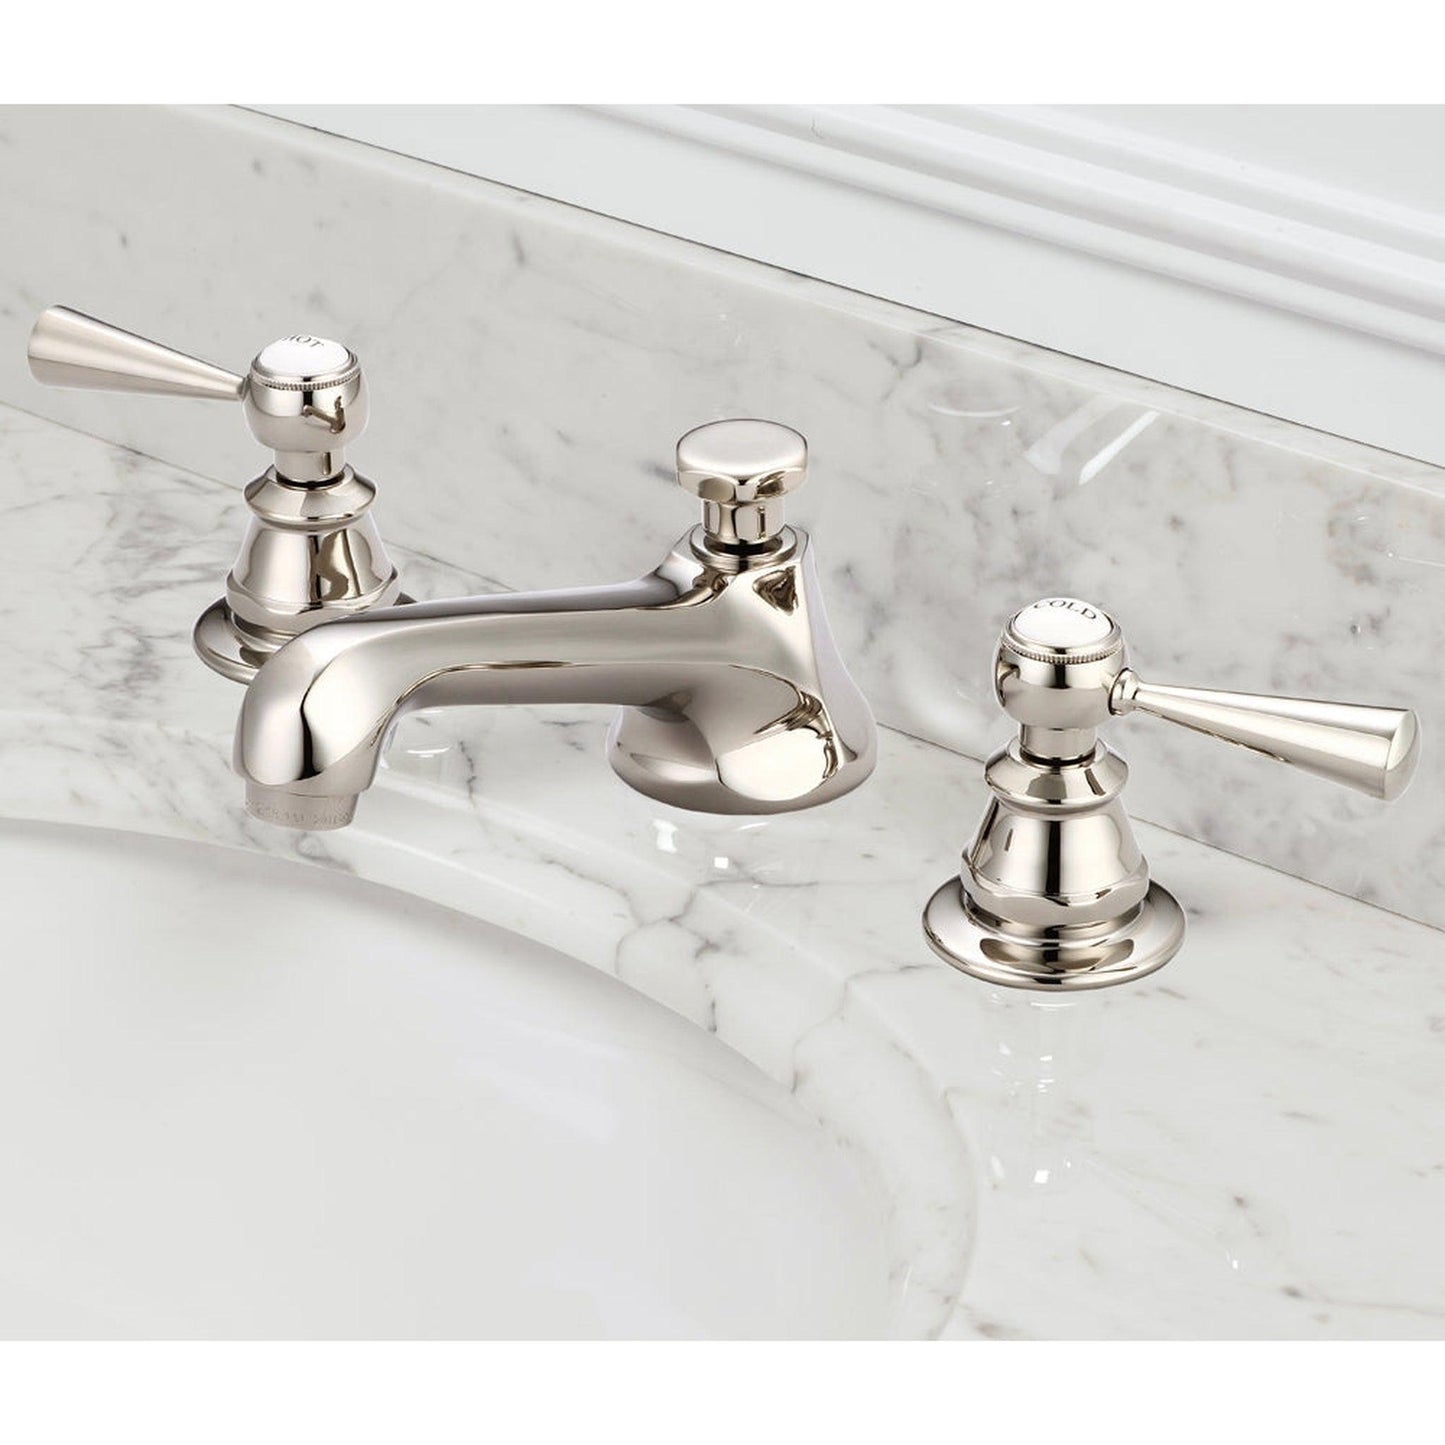 Water Creation American 20th Century Classic Widespread Lavatory F2-0009 8" Ivory Solid Brass Faucet With Pop-Up Drain And Torch Lever Handles, Hot And Cold Labels Included